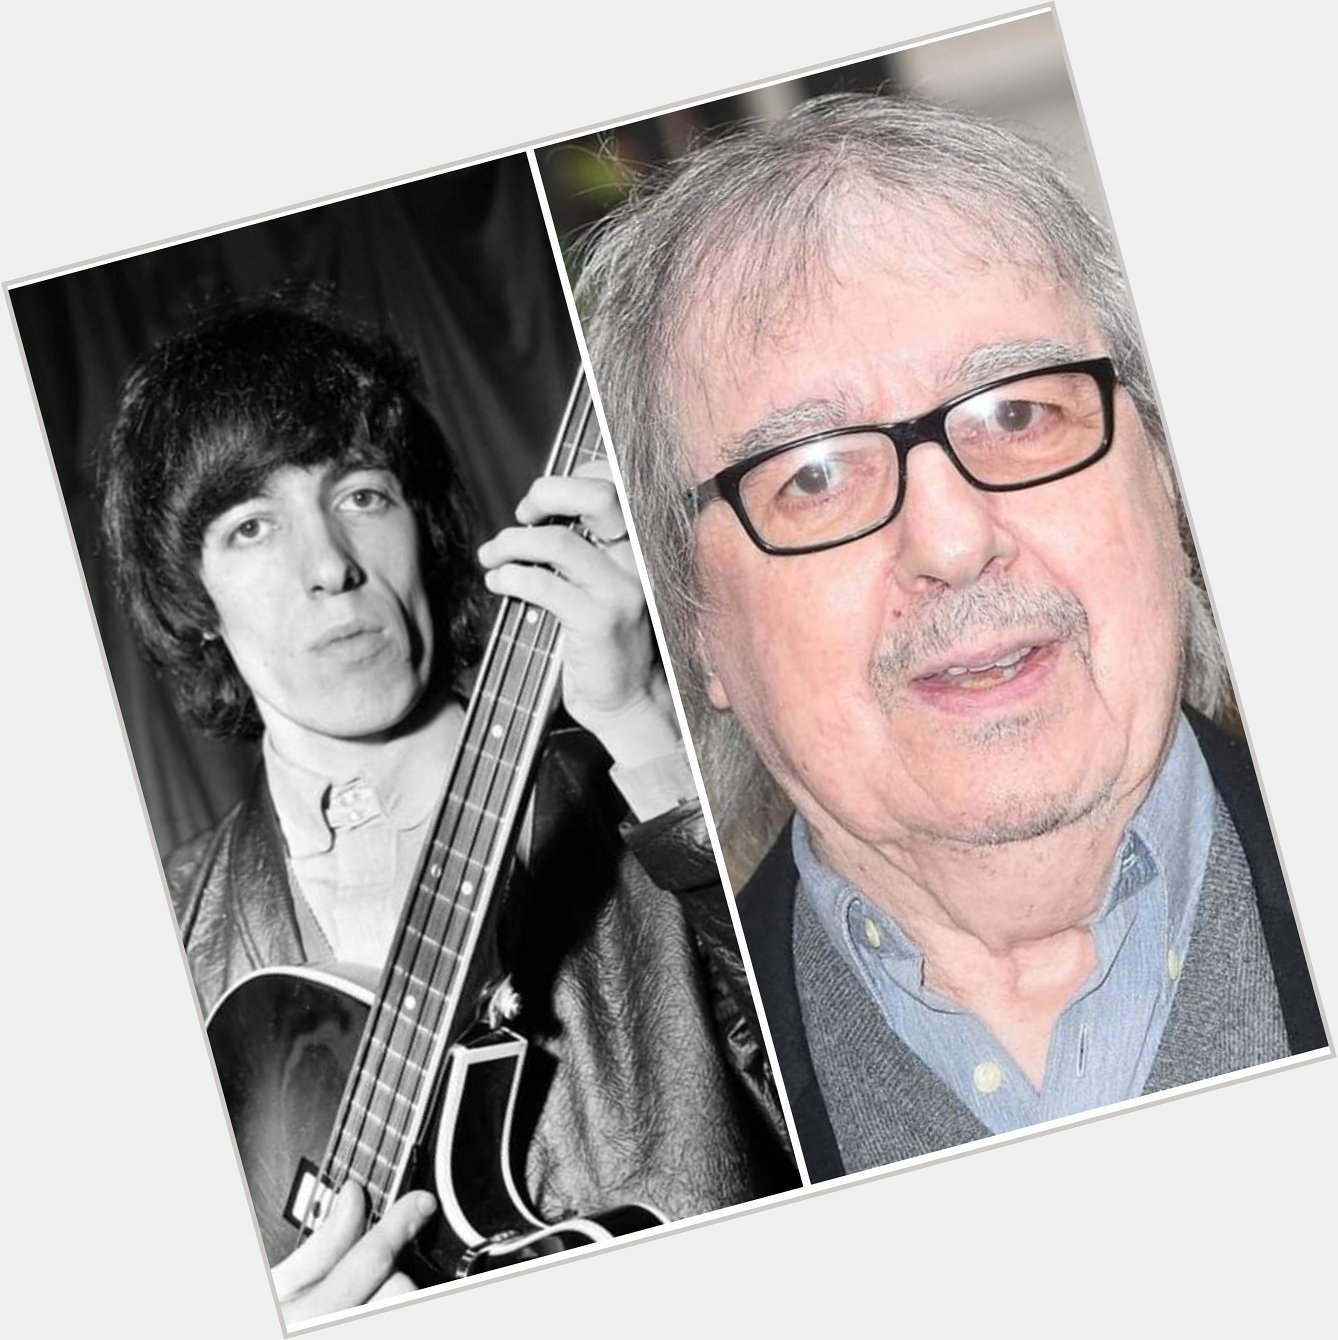 HAPPY BIRTHDAY!
Bill Wyman  October 24, 1936 86
( The Rolling Stones/Willie and the Poor Boys ) 